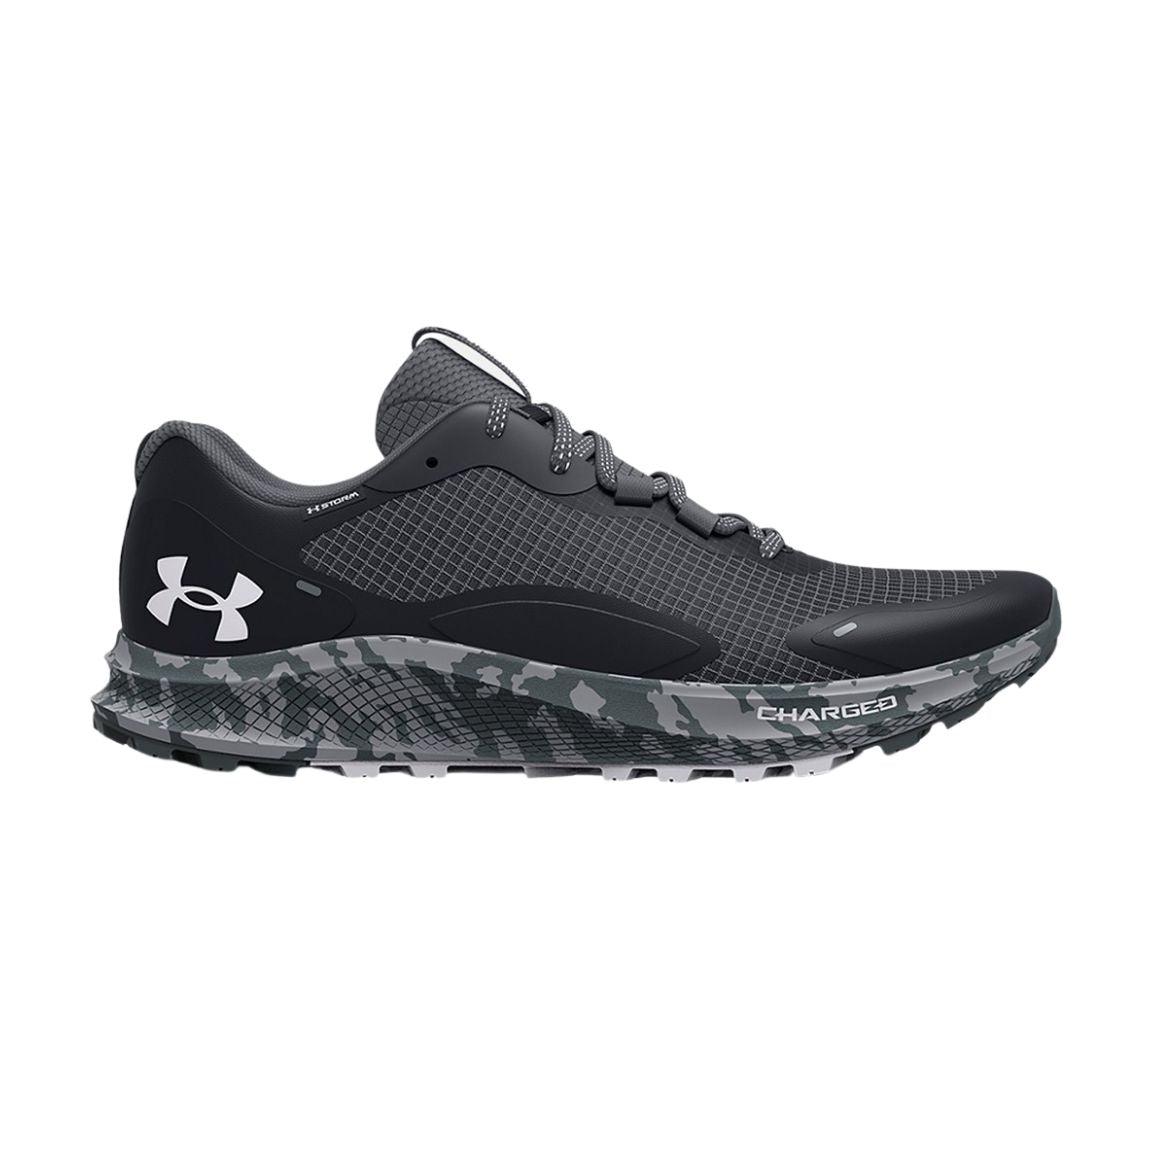 Men's Under Armour Charged Bandit Trail 2 Storm Running Shoes